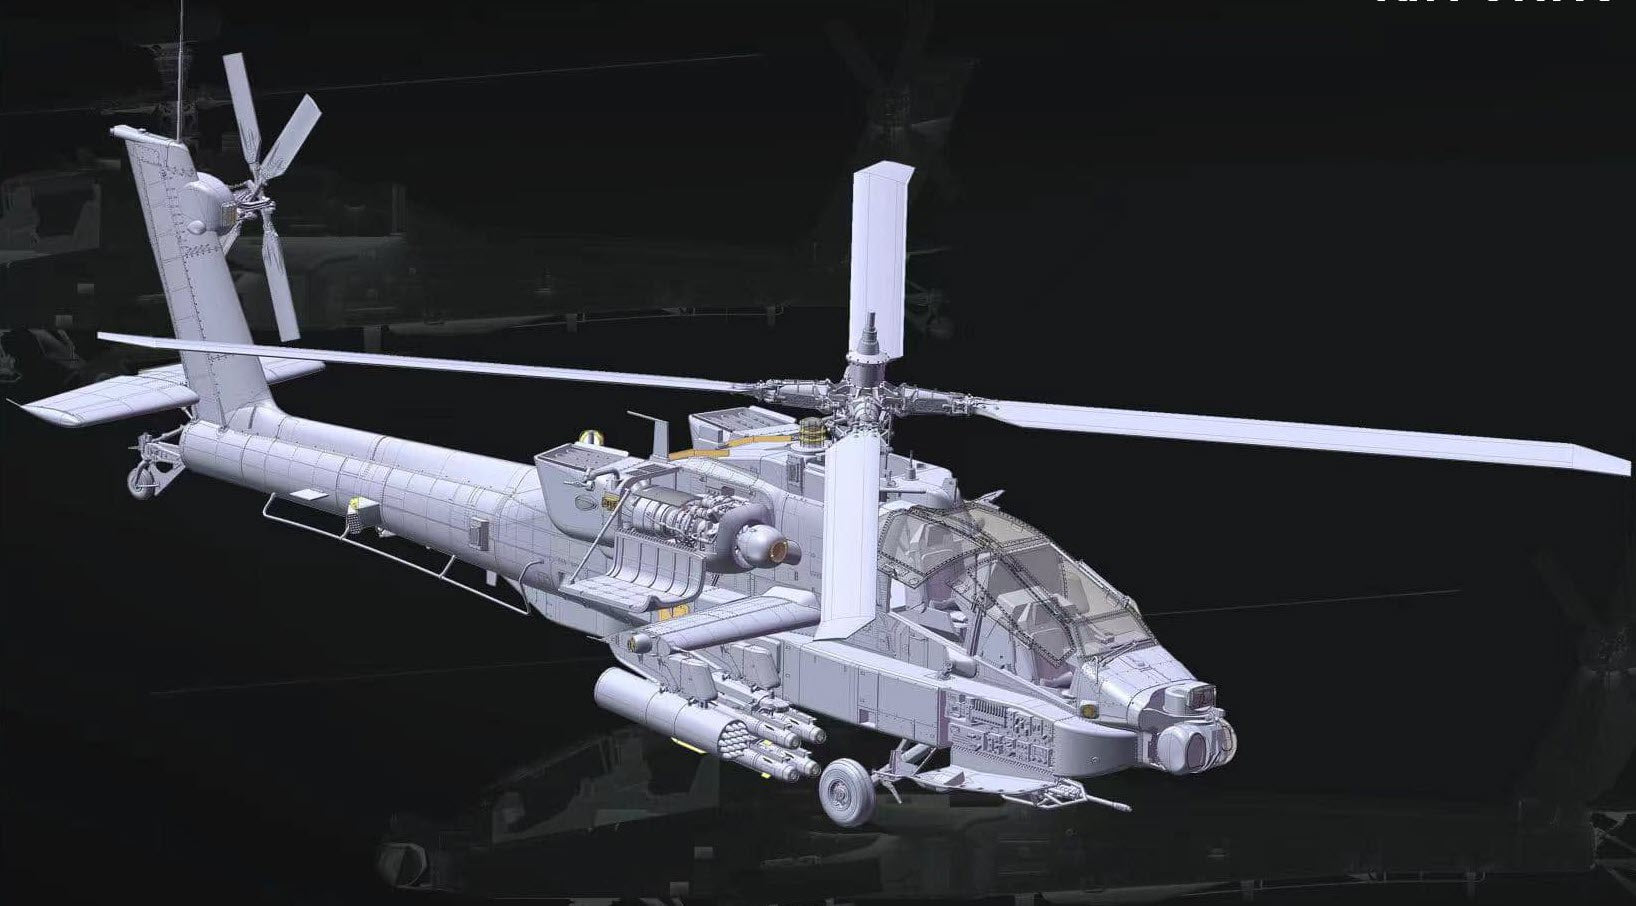 TAK2603 - Takom 1/35 E of the World AH-64E Attack Helicopter - LIMITED